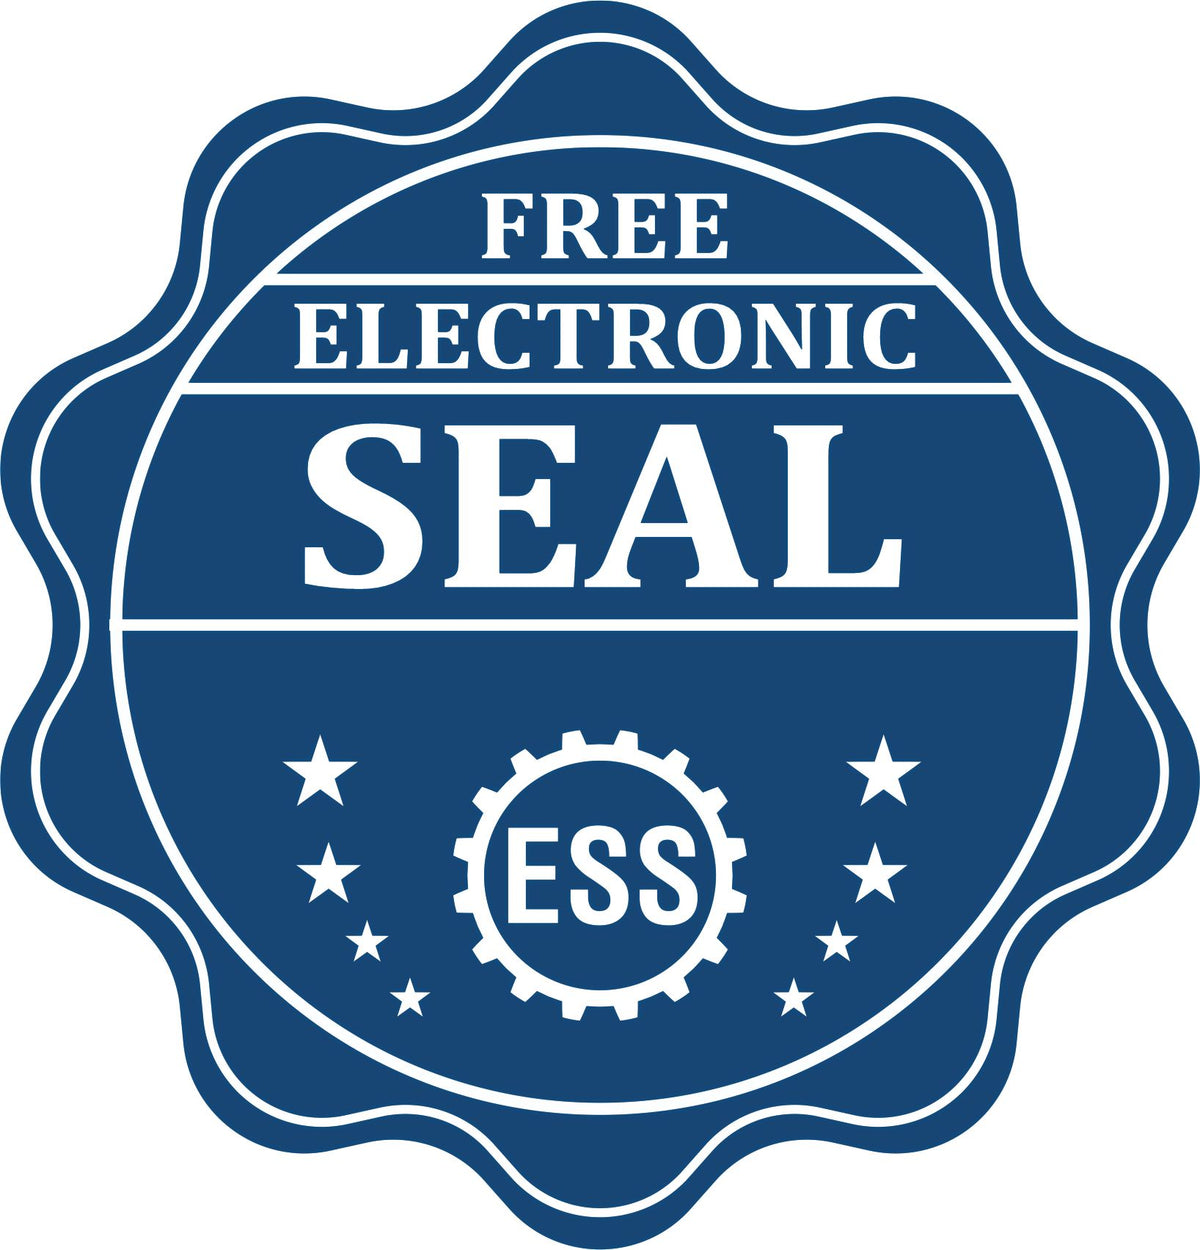 A badge showing a free electronic seal for the Handheld Arkansas Professional Geologist Embosser with stars and the ESS gear on the emblem.